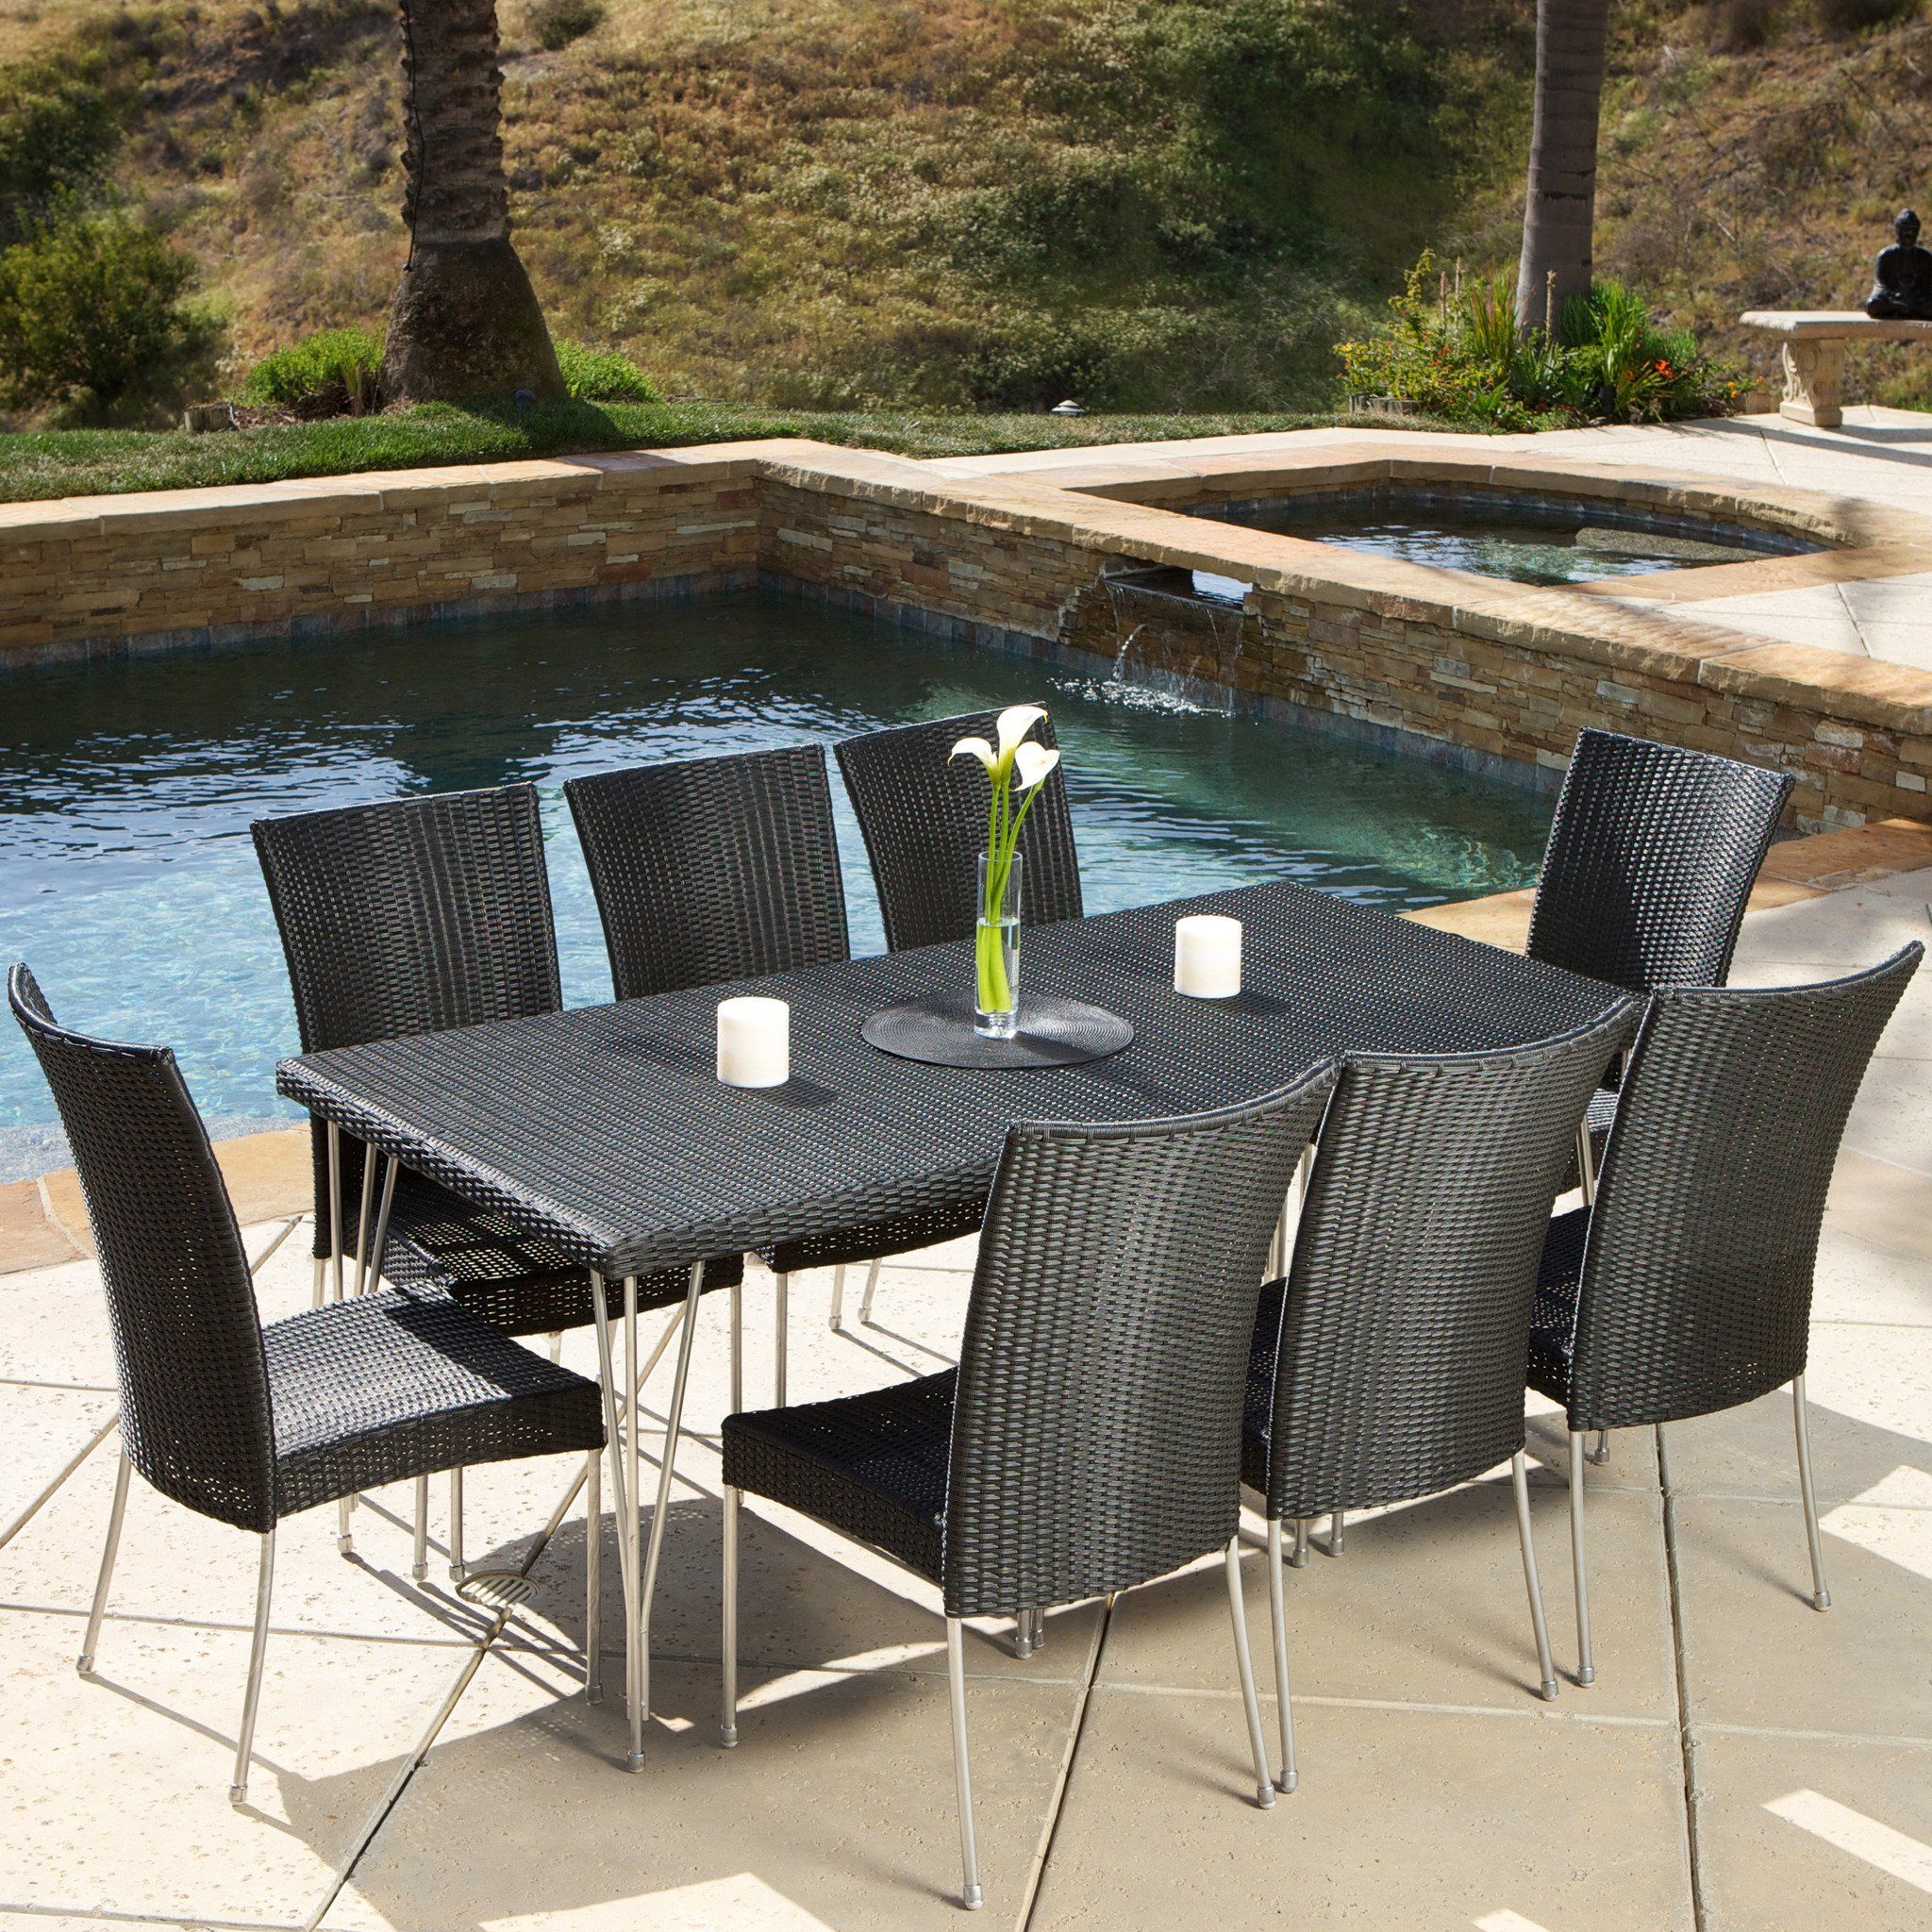 Ad: Tampa 9 Piece Outdoor Black Wicker Dining Set #Deals | Patio Regarding Black Outdoor Modern Chairs Sets (View 2 of 15)